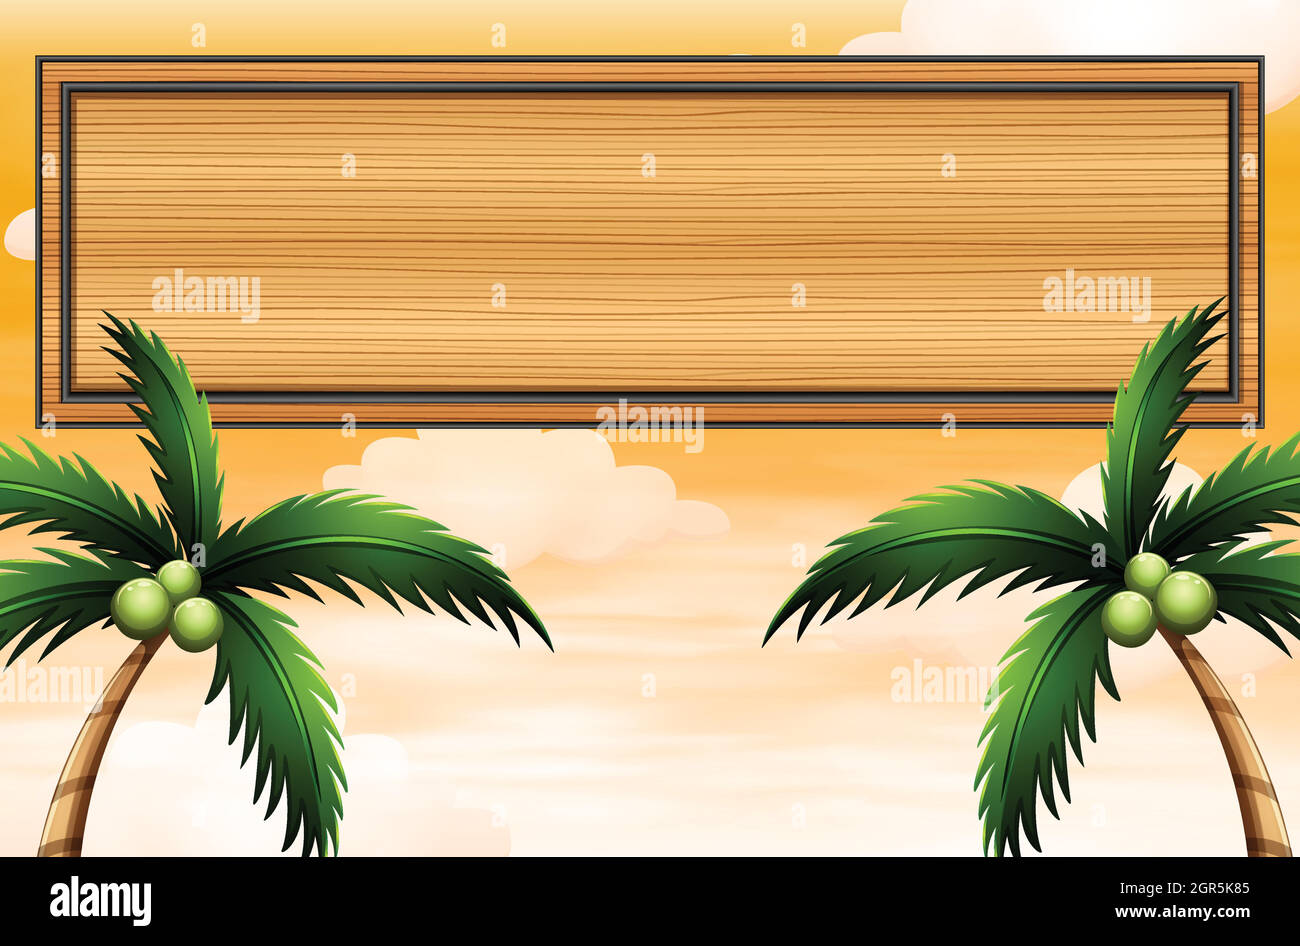 An empty wooden signboard with coconut trees Stock Vector